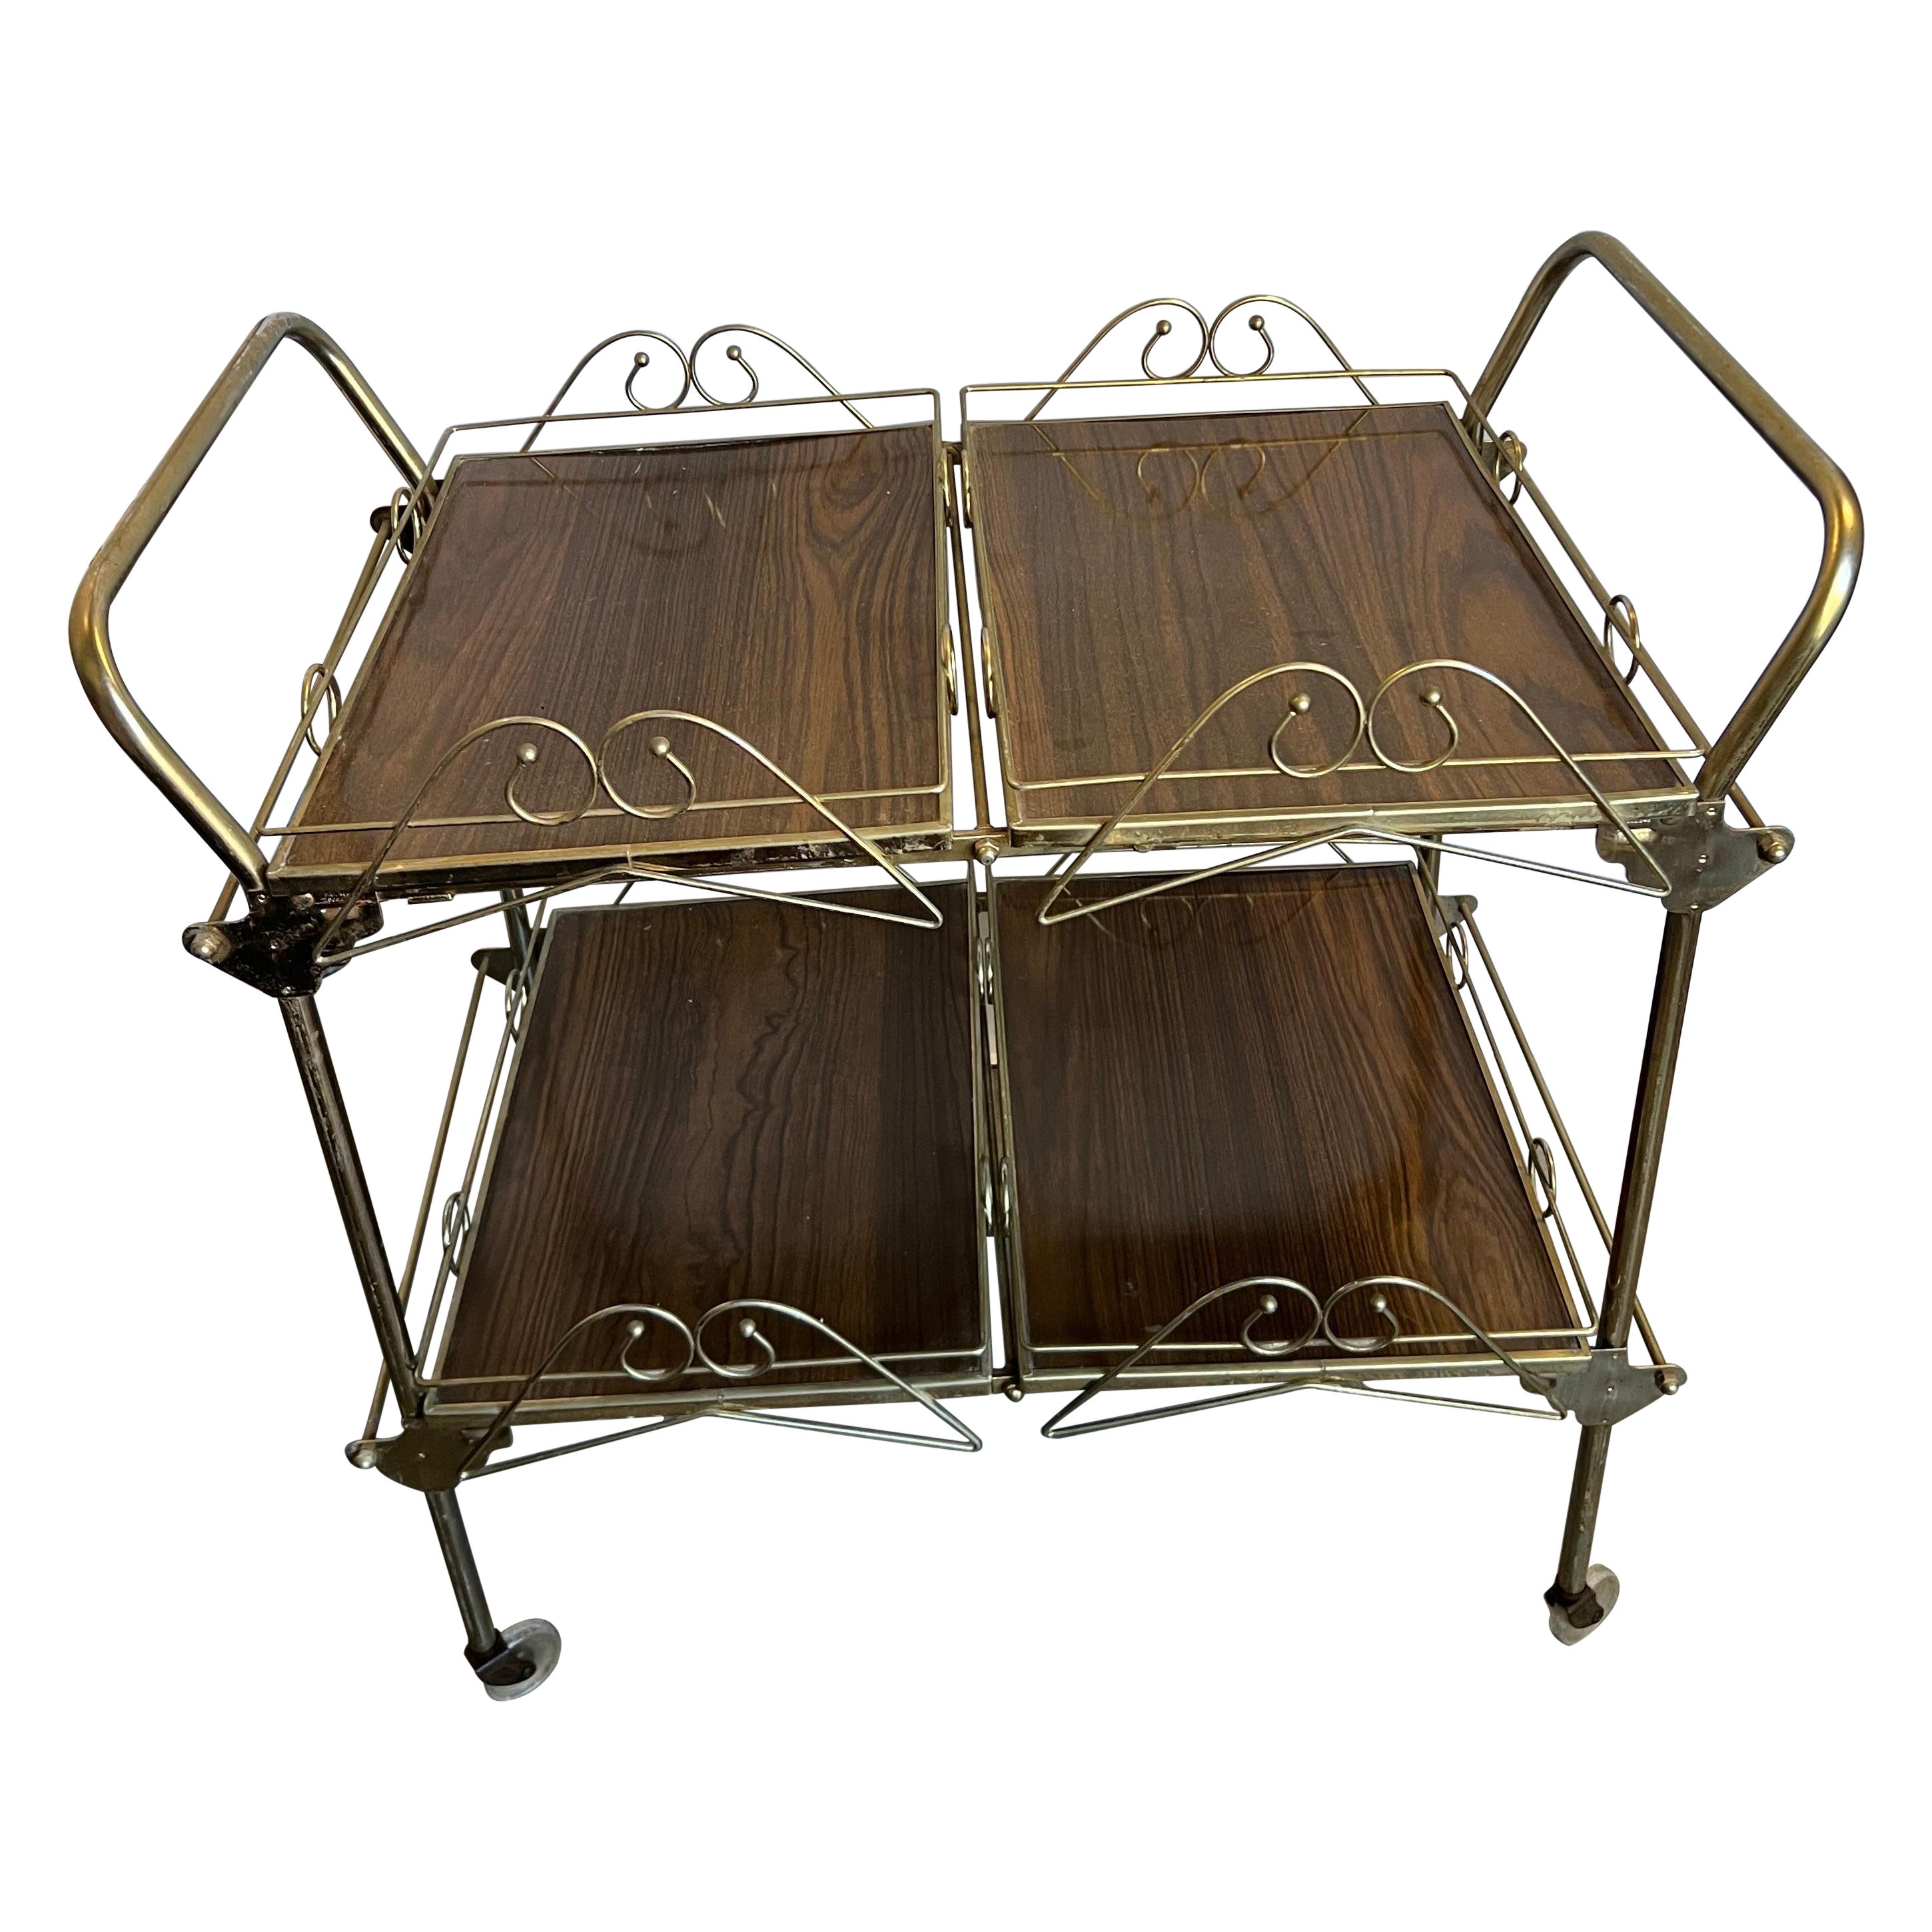 Mid-20th Century Hollywood Regency Brass and Walnut Tone Serving Cart